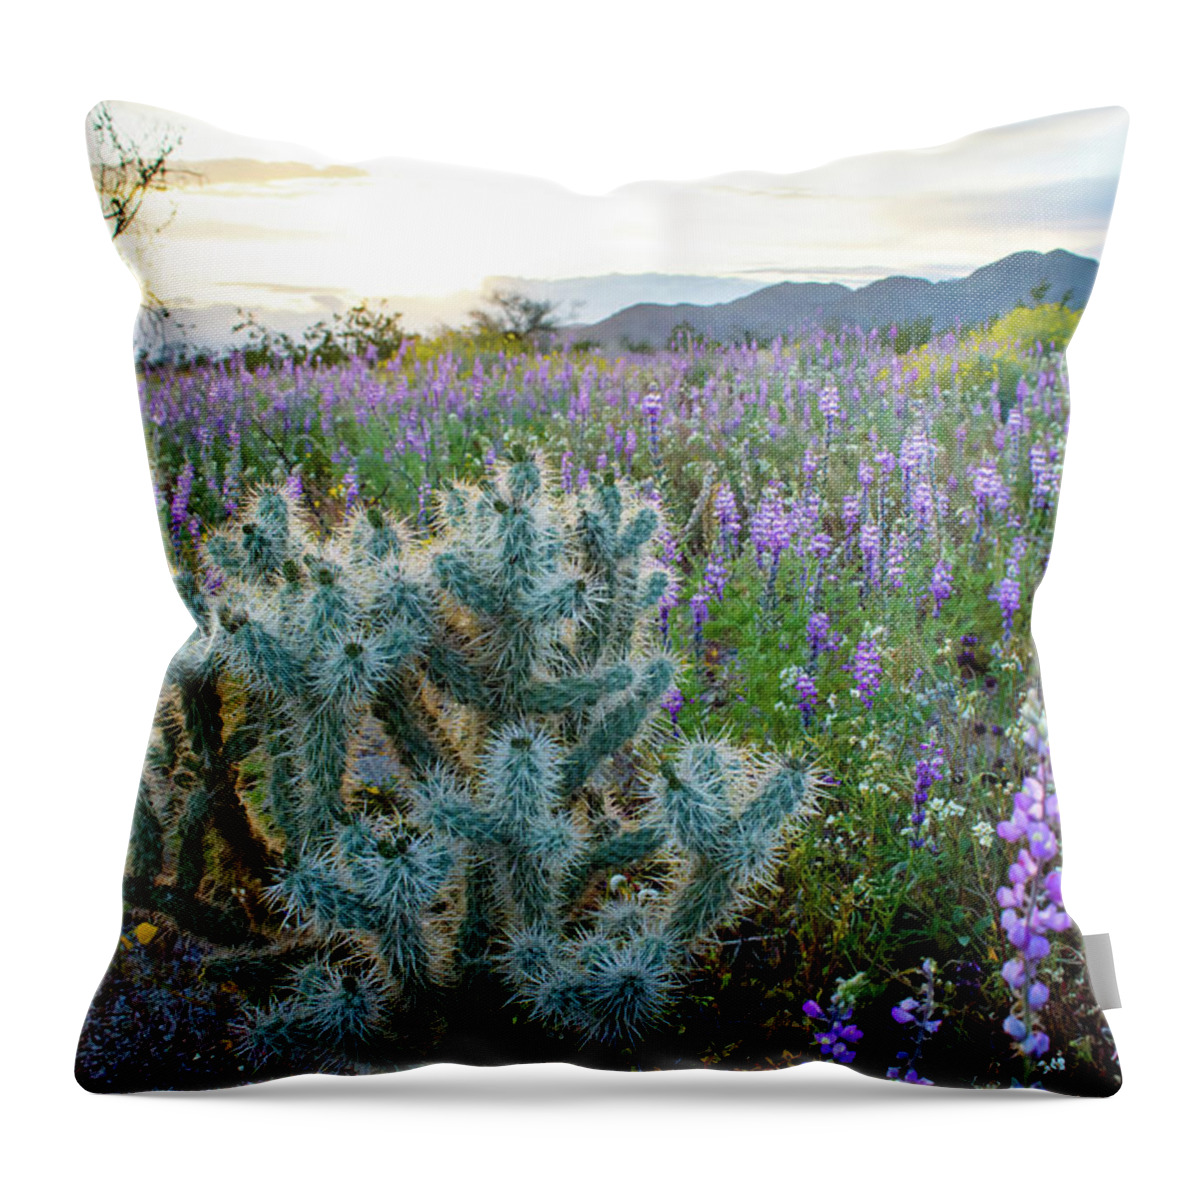 Grape Soda Lupine Throw Pillow featuring the photograph Joshua Tree Lupine Sunset by Kyle Hanson